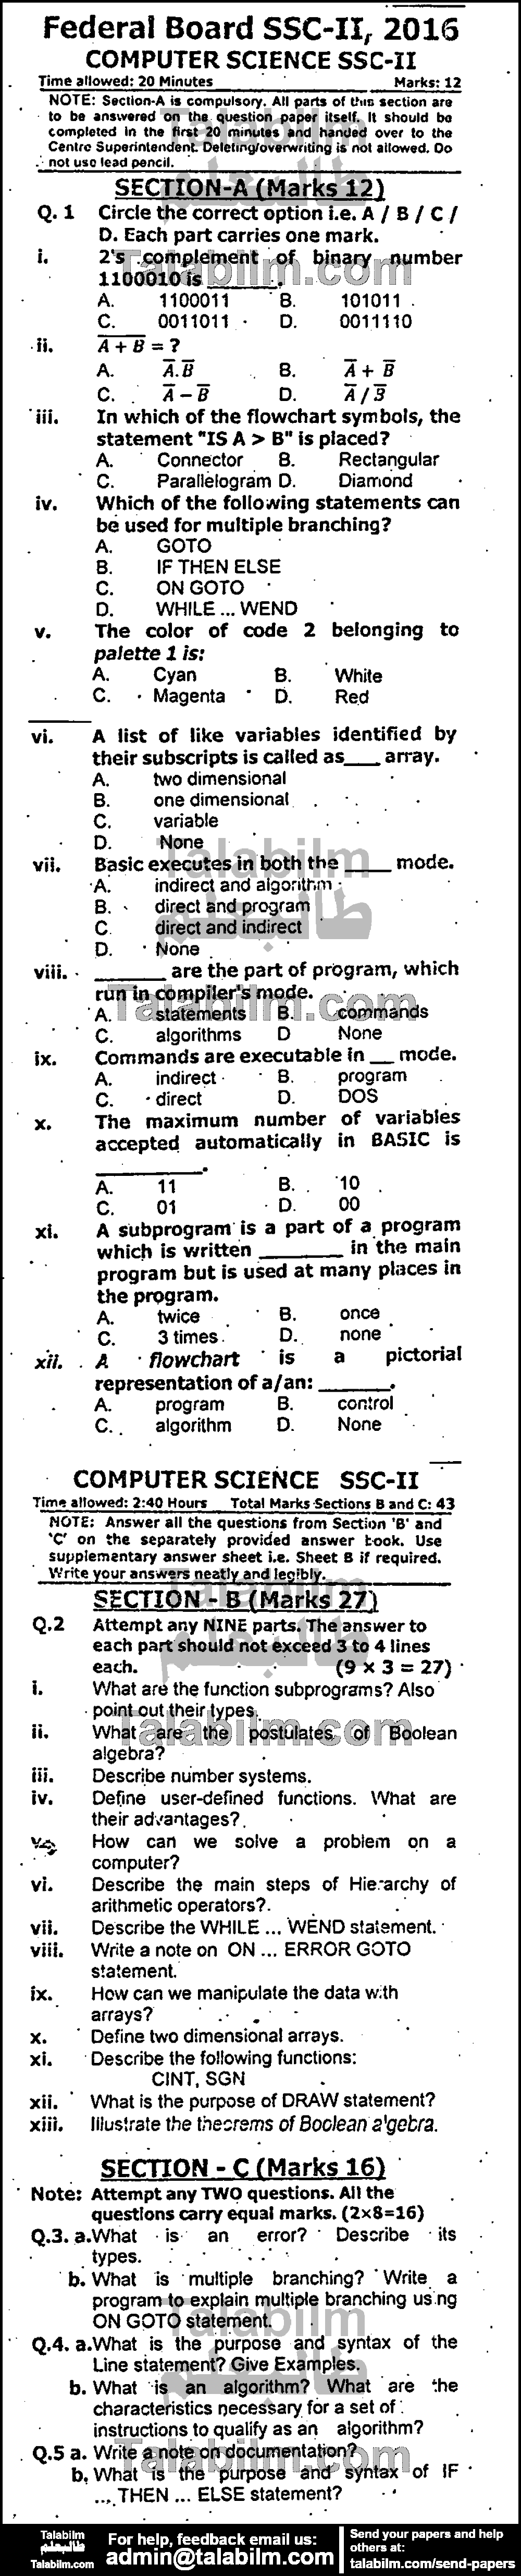 Computer Science 0 past paper for 2016 Group-I